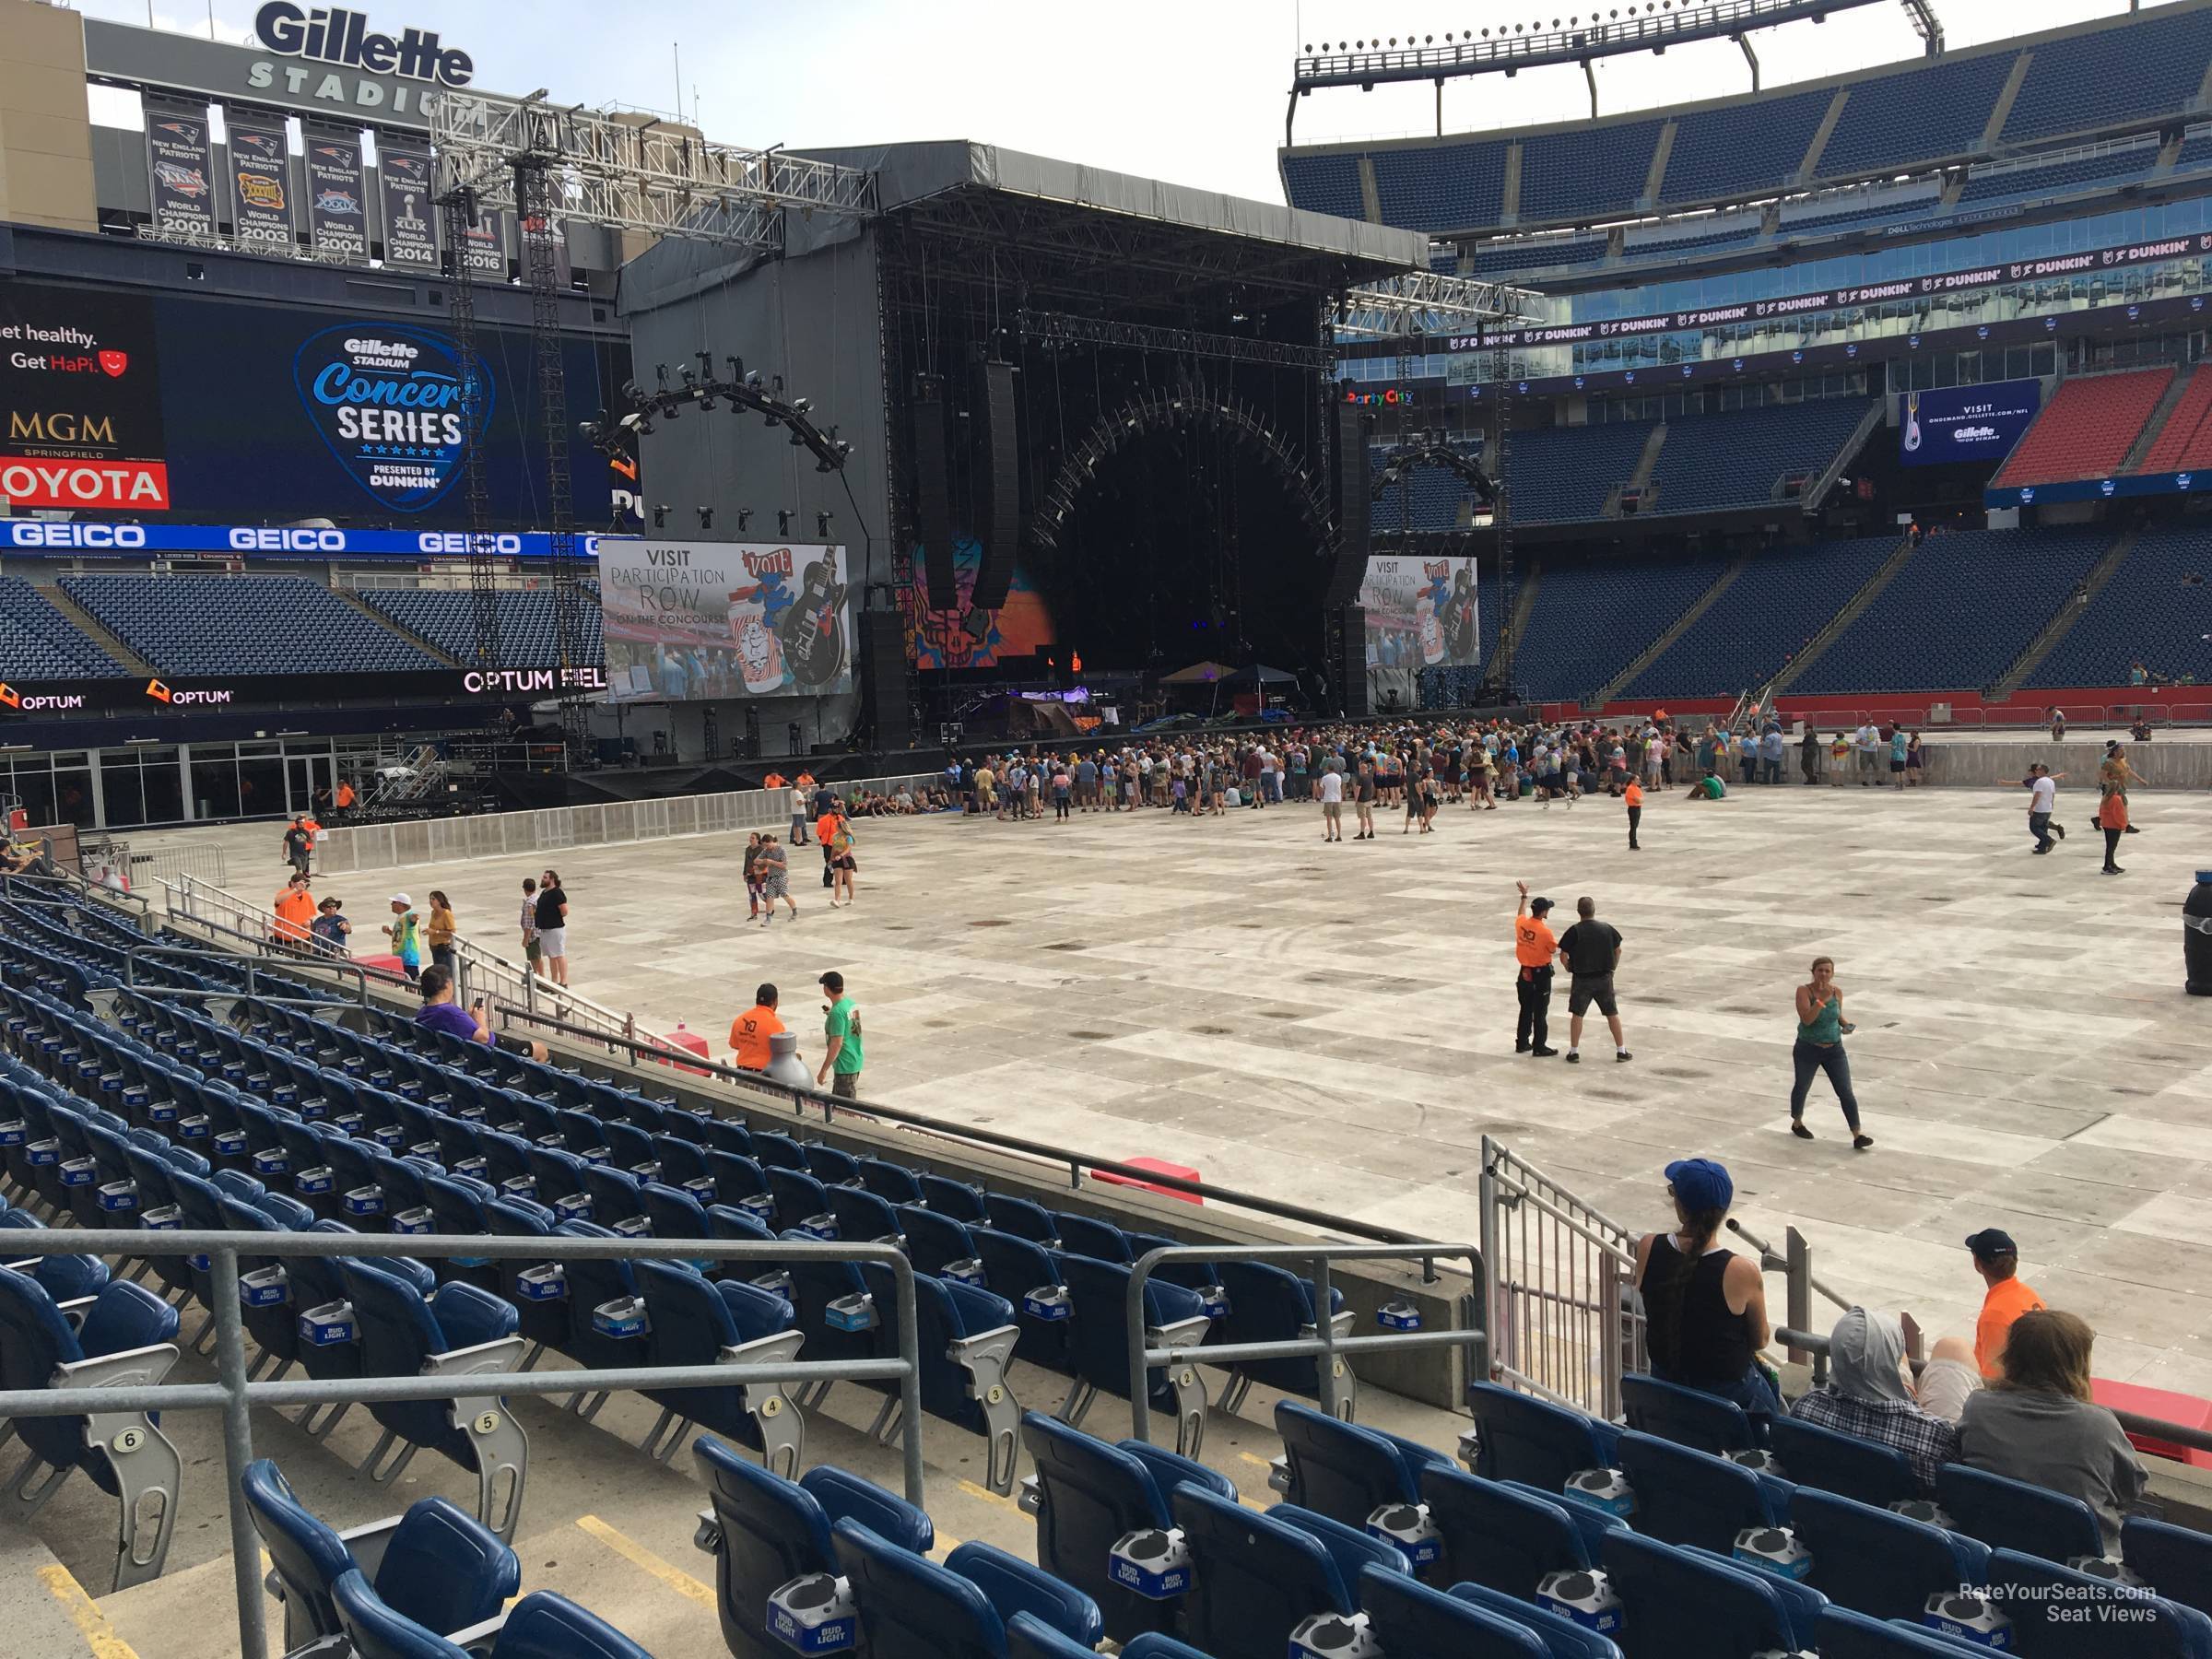 Gillette Stadium Section 109 Concert Seating - RateYourSeats.com